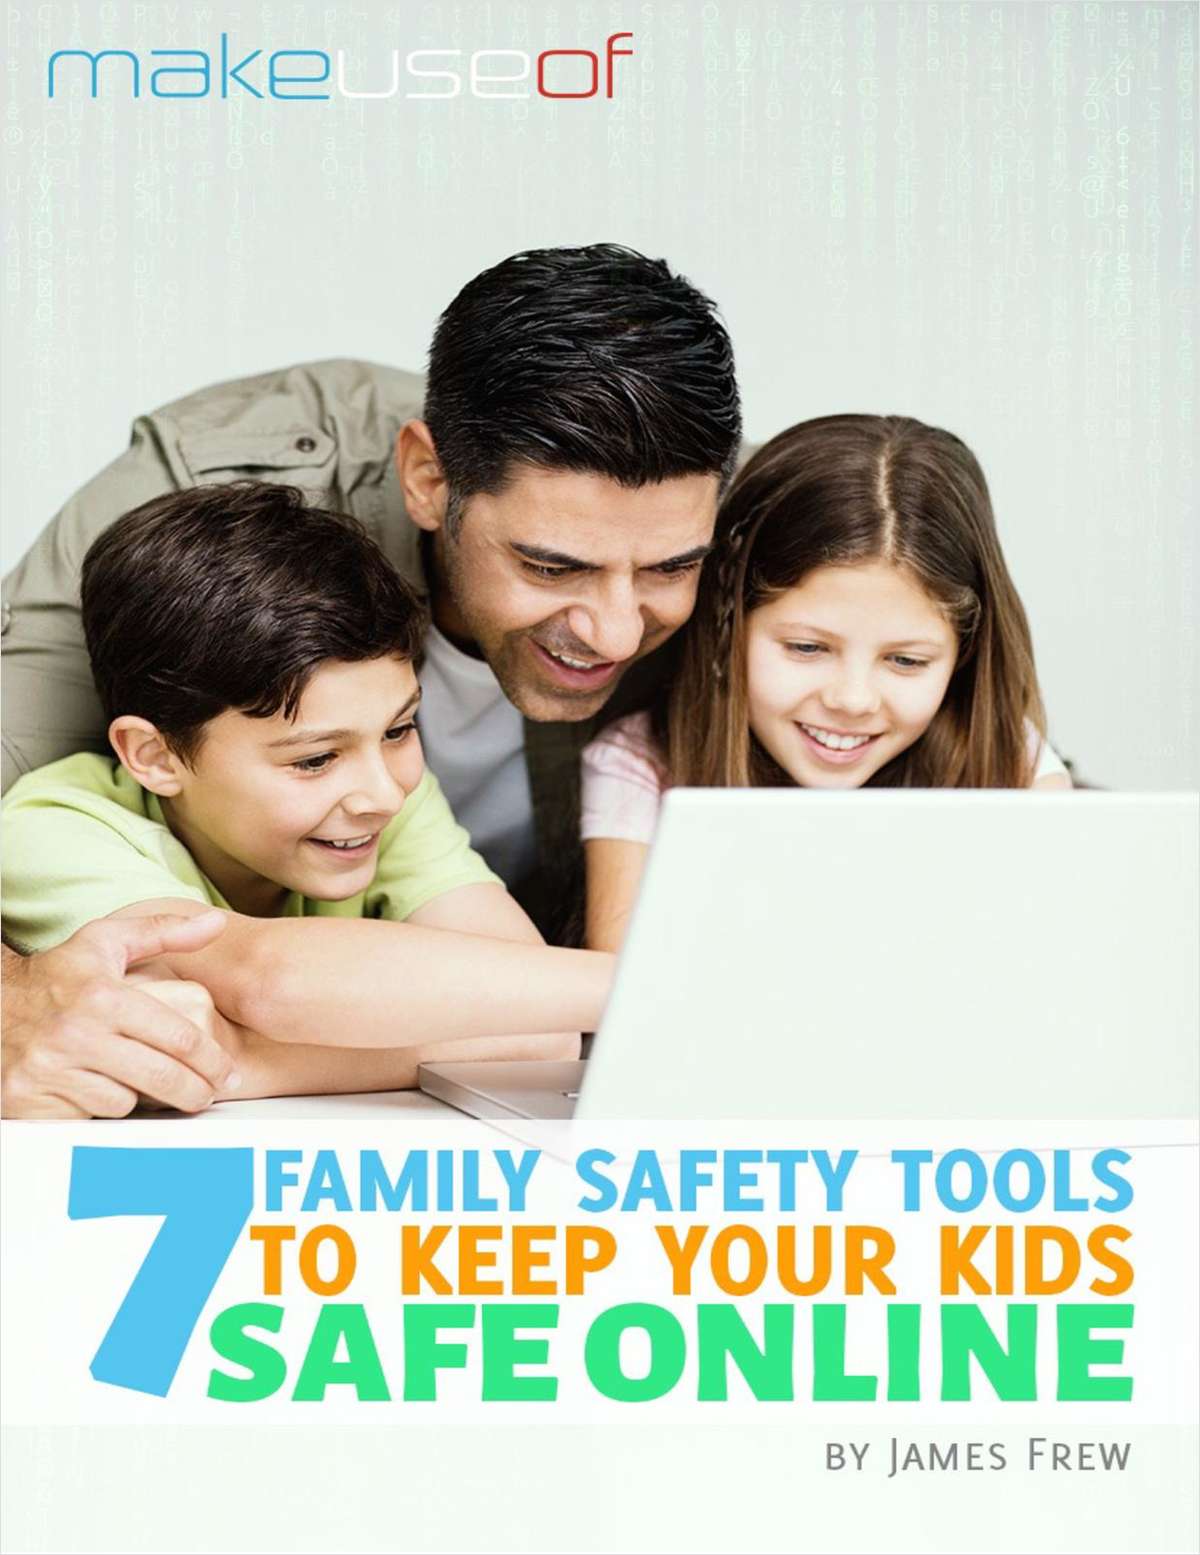 7 Family Safety Tools To Keep Your Kids Safe Online